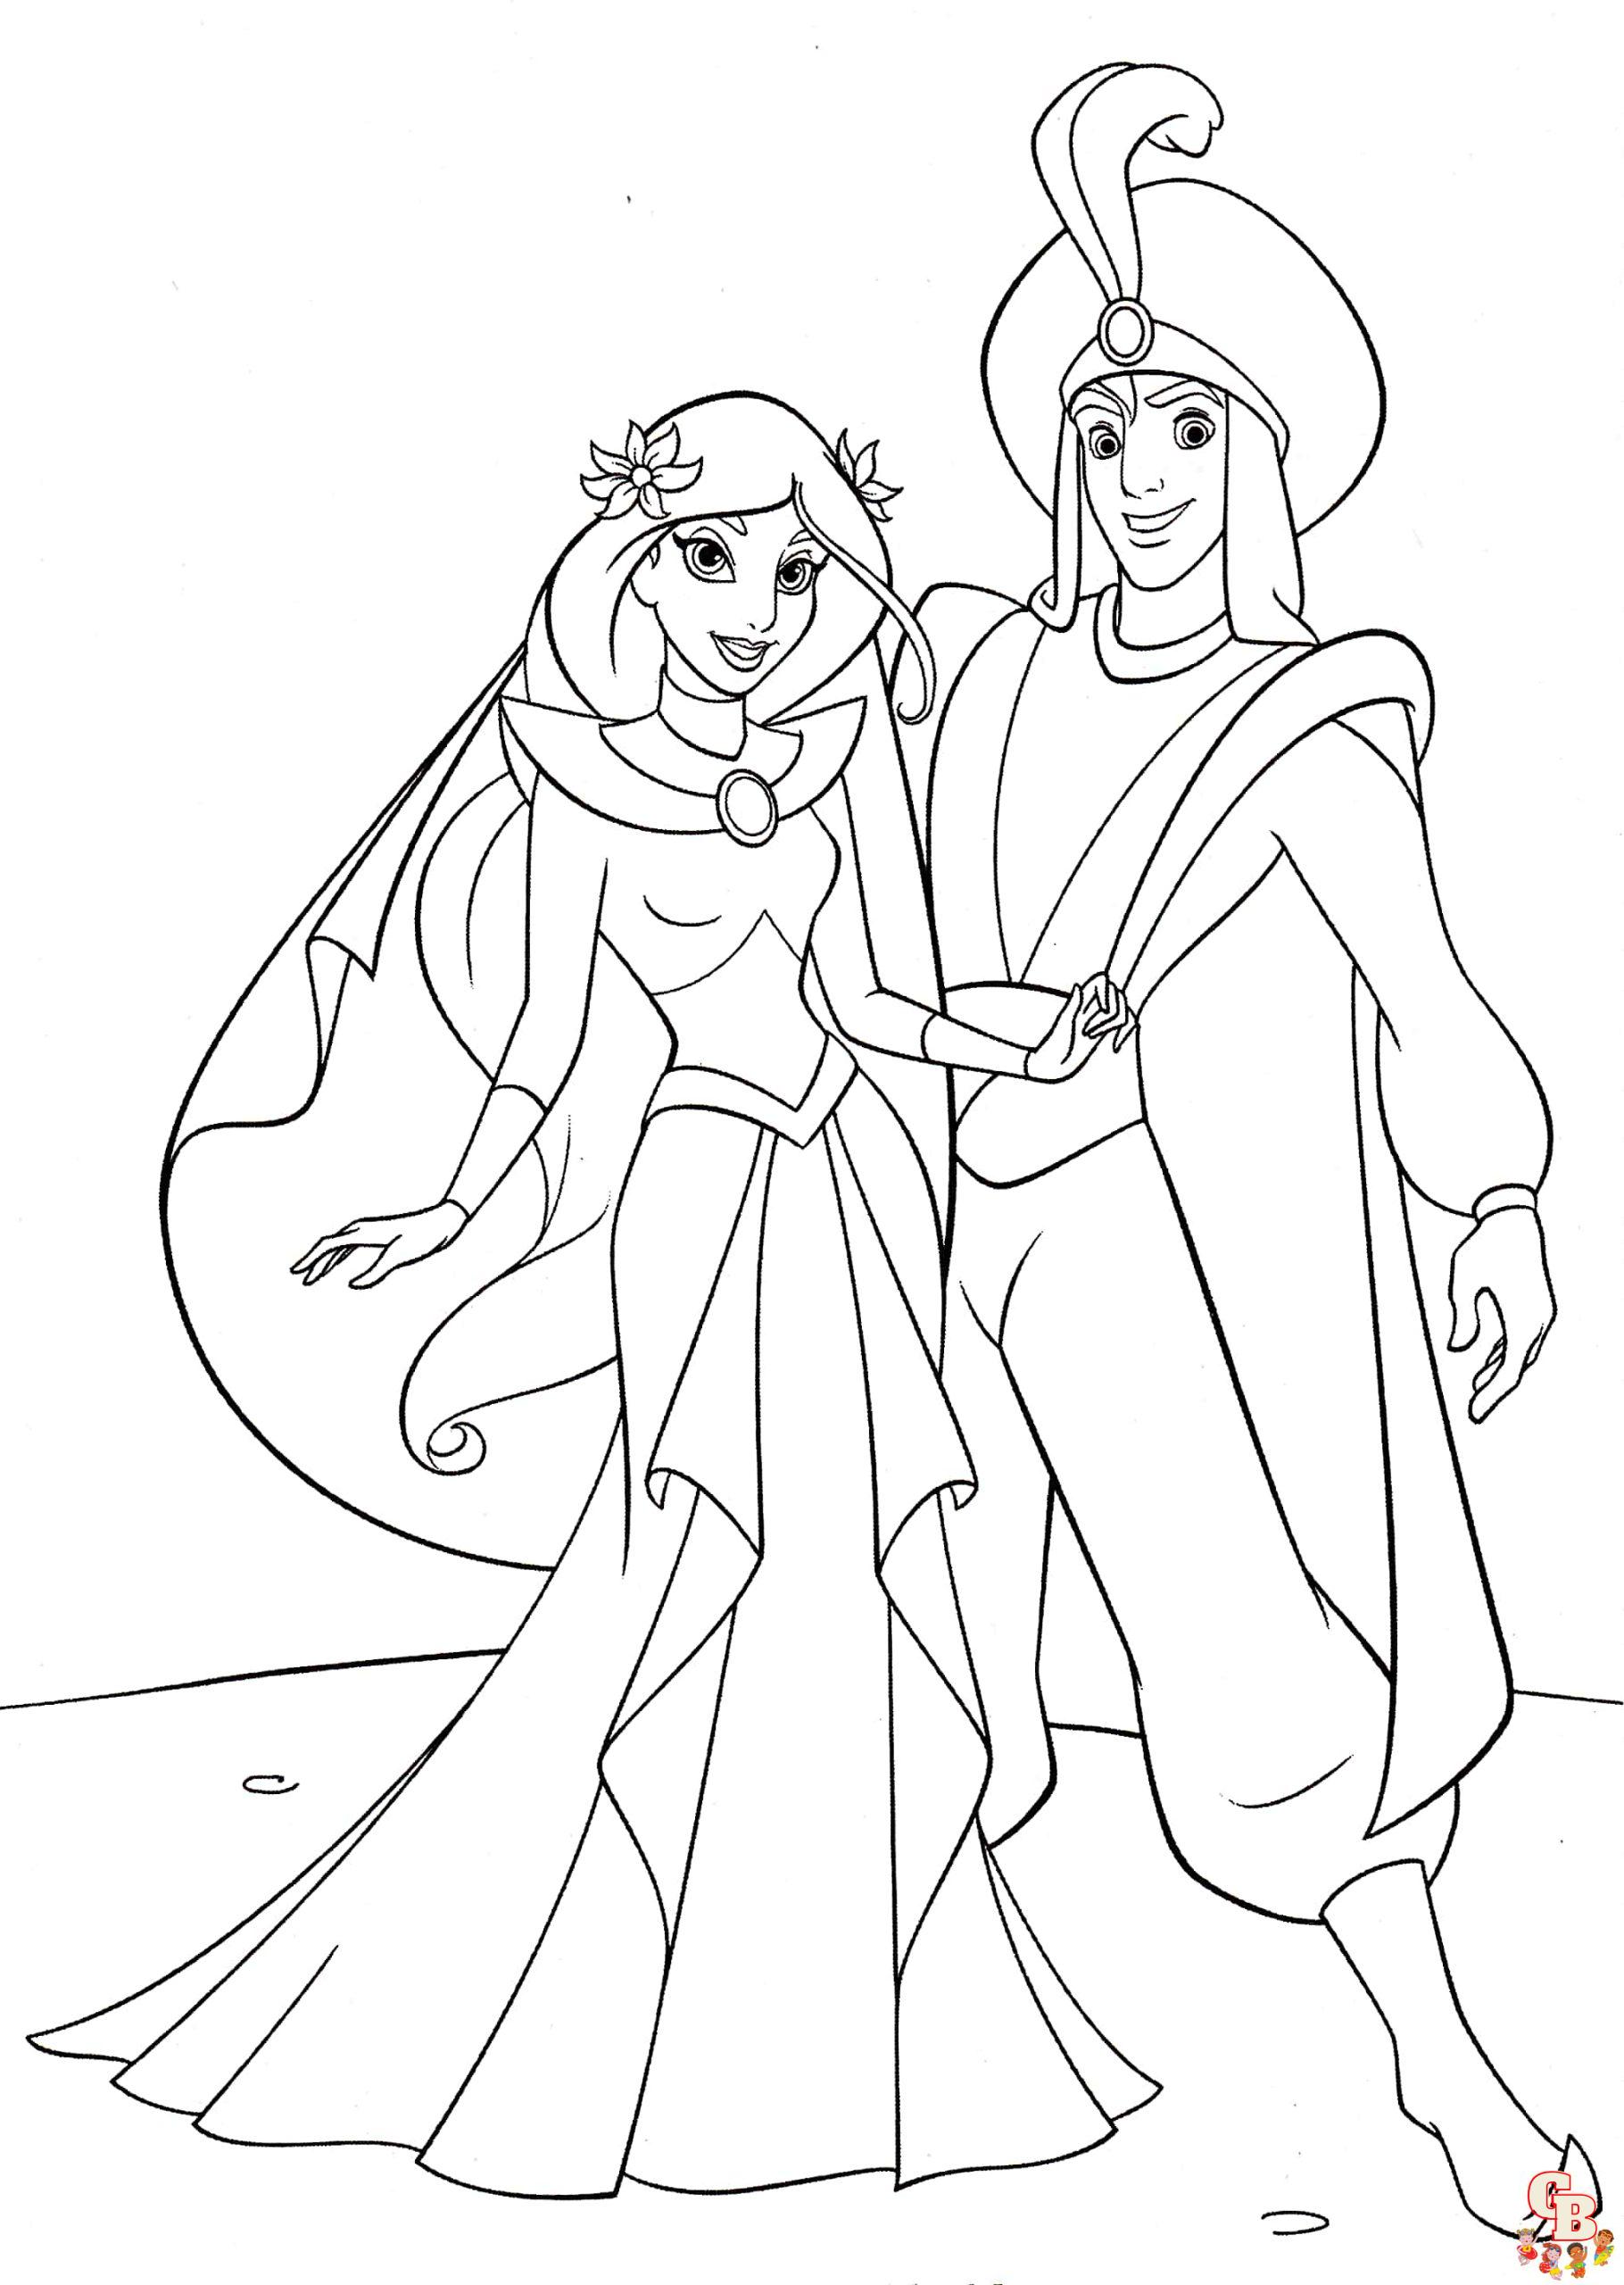 Jasmine and Aladdin Coloring Pages 1